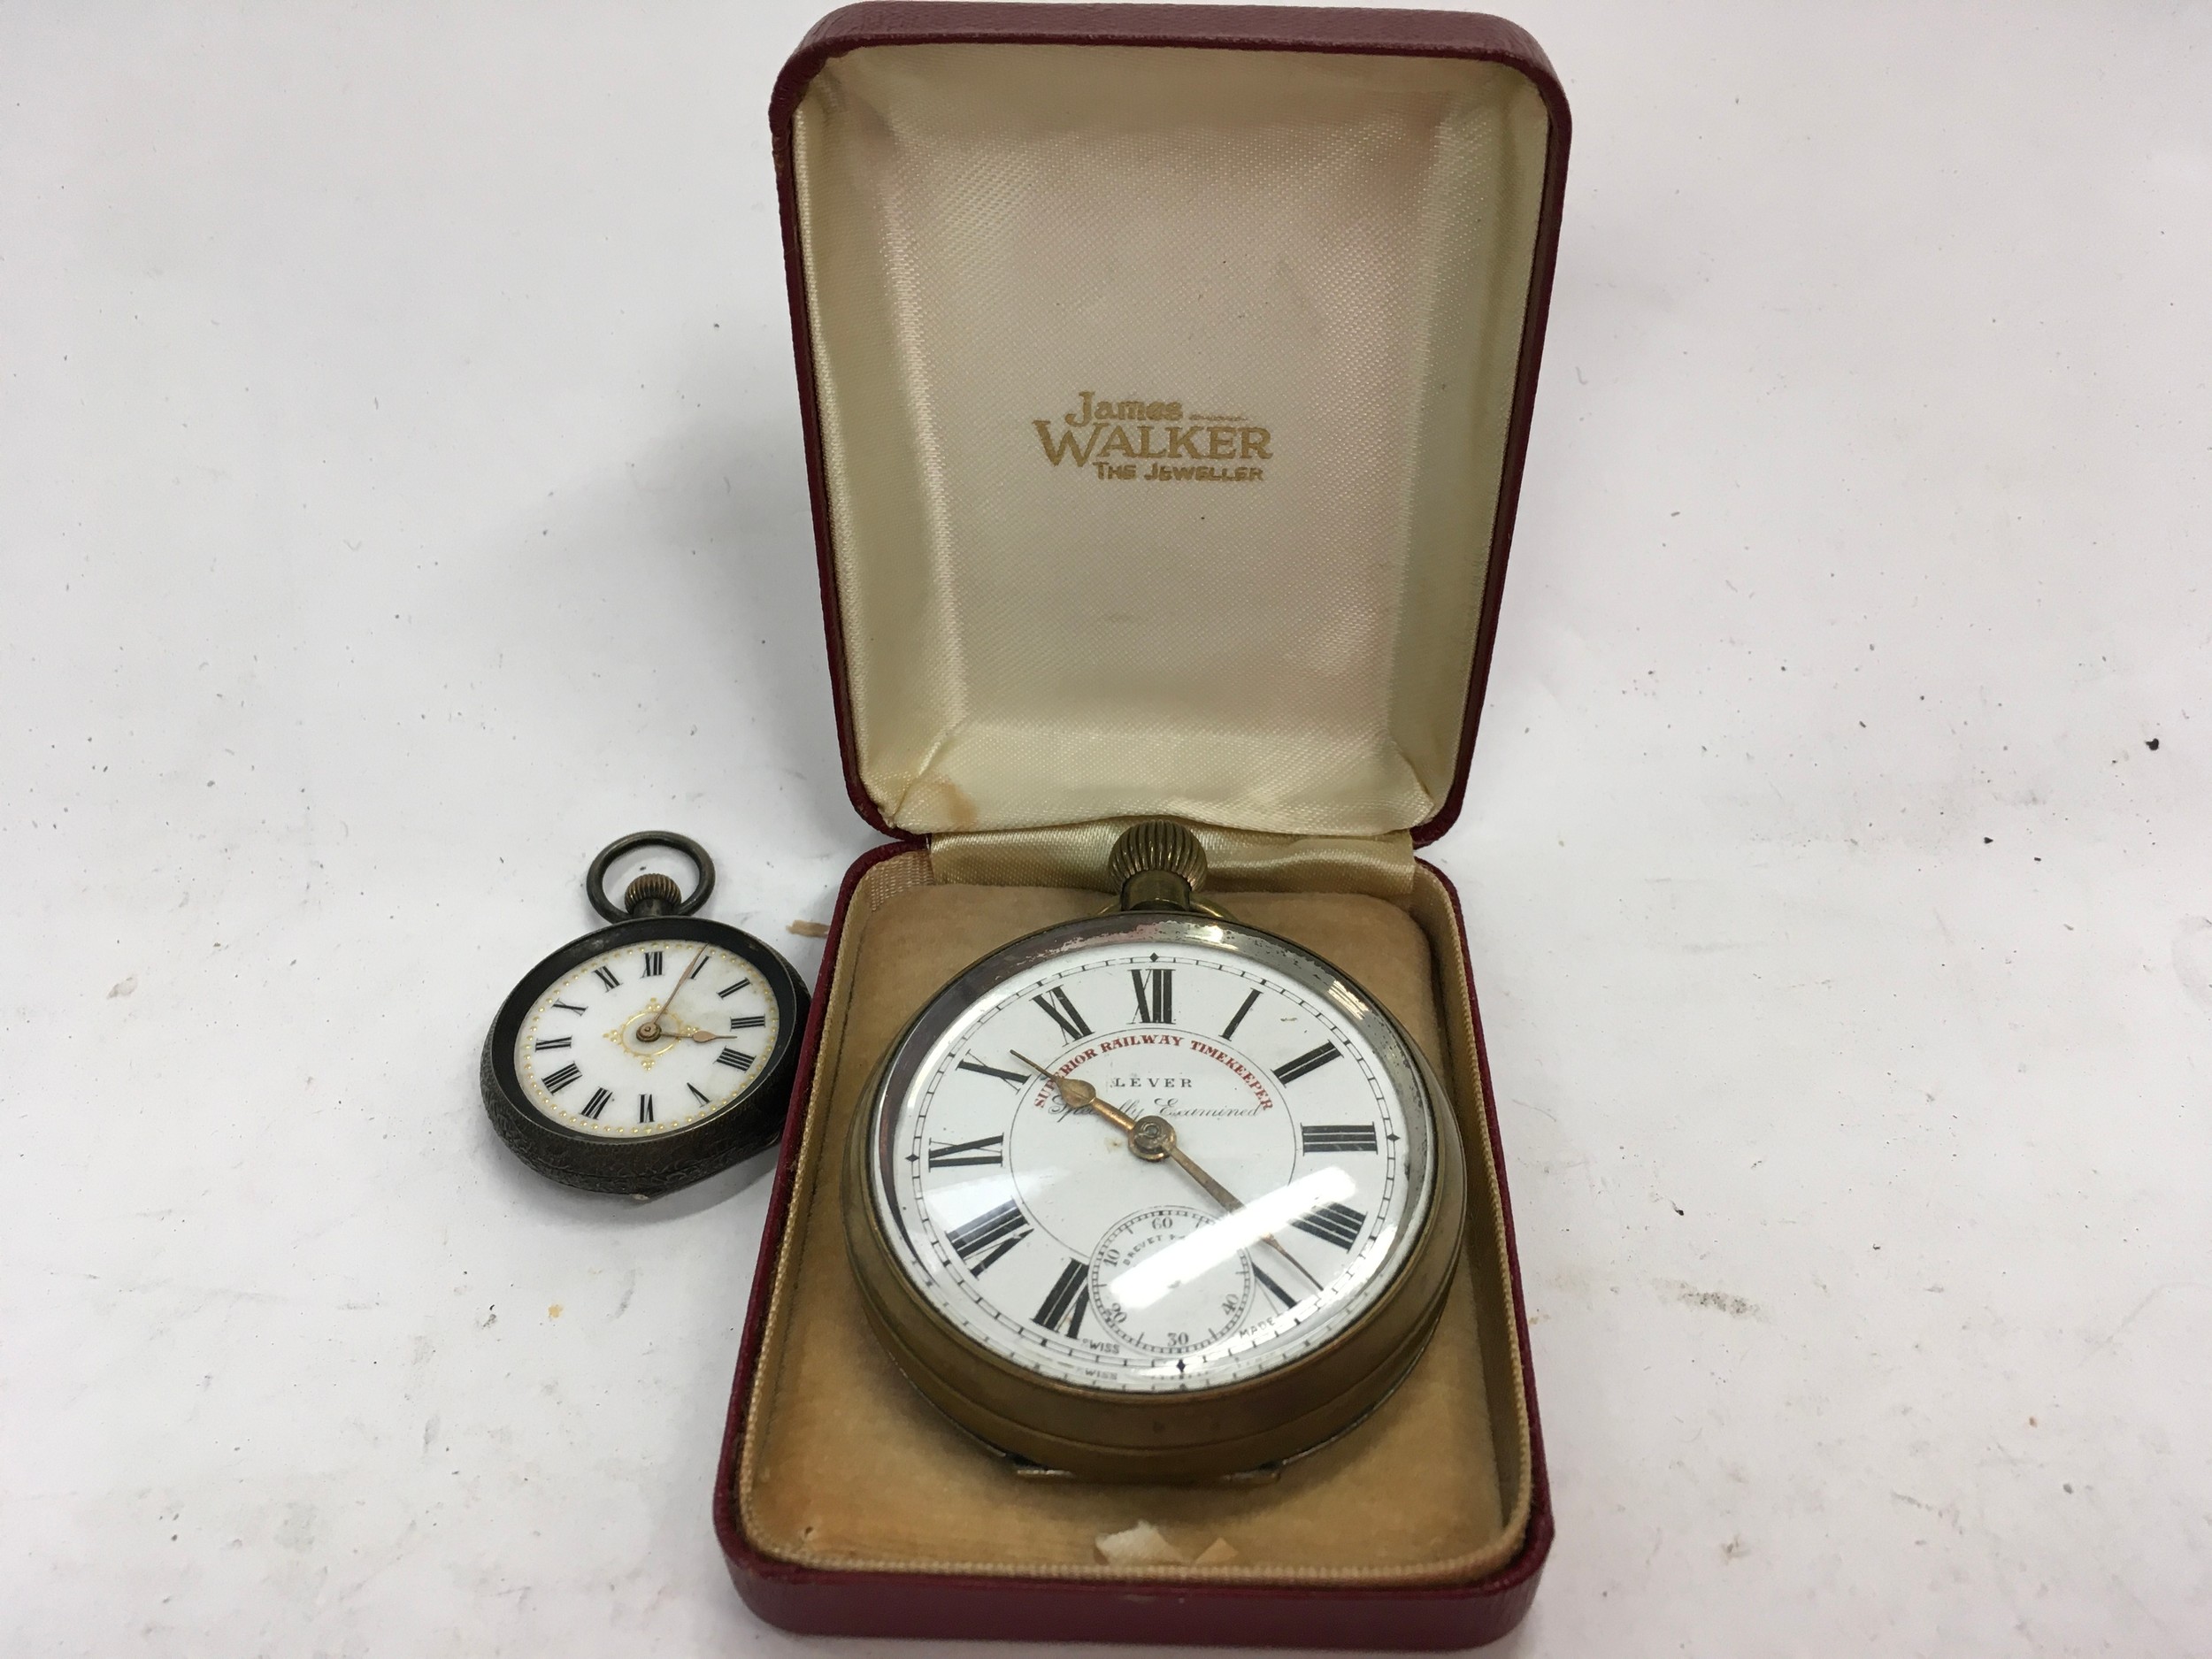 Superior Railway Timekeeper pocket watch together another silver pocket watch